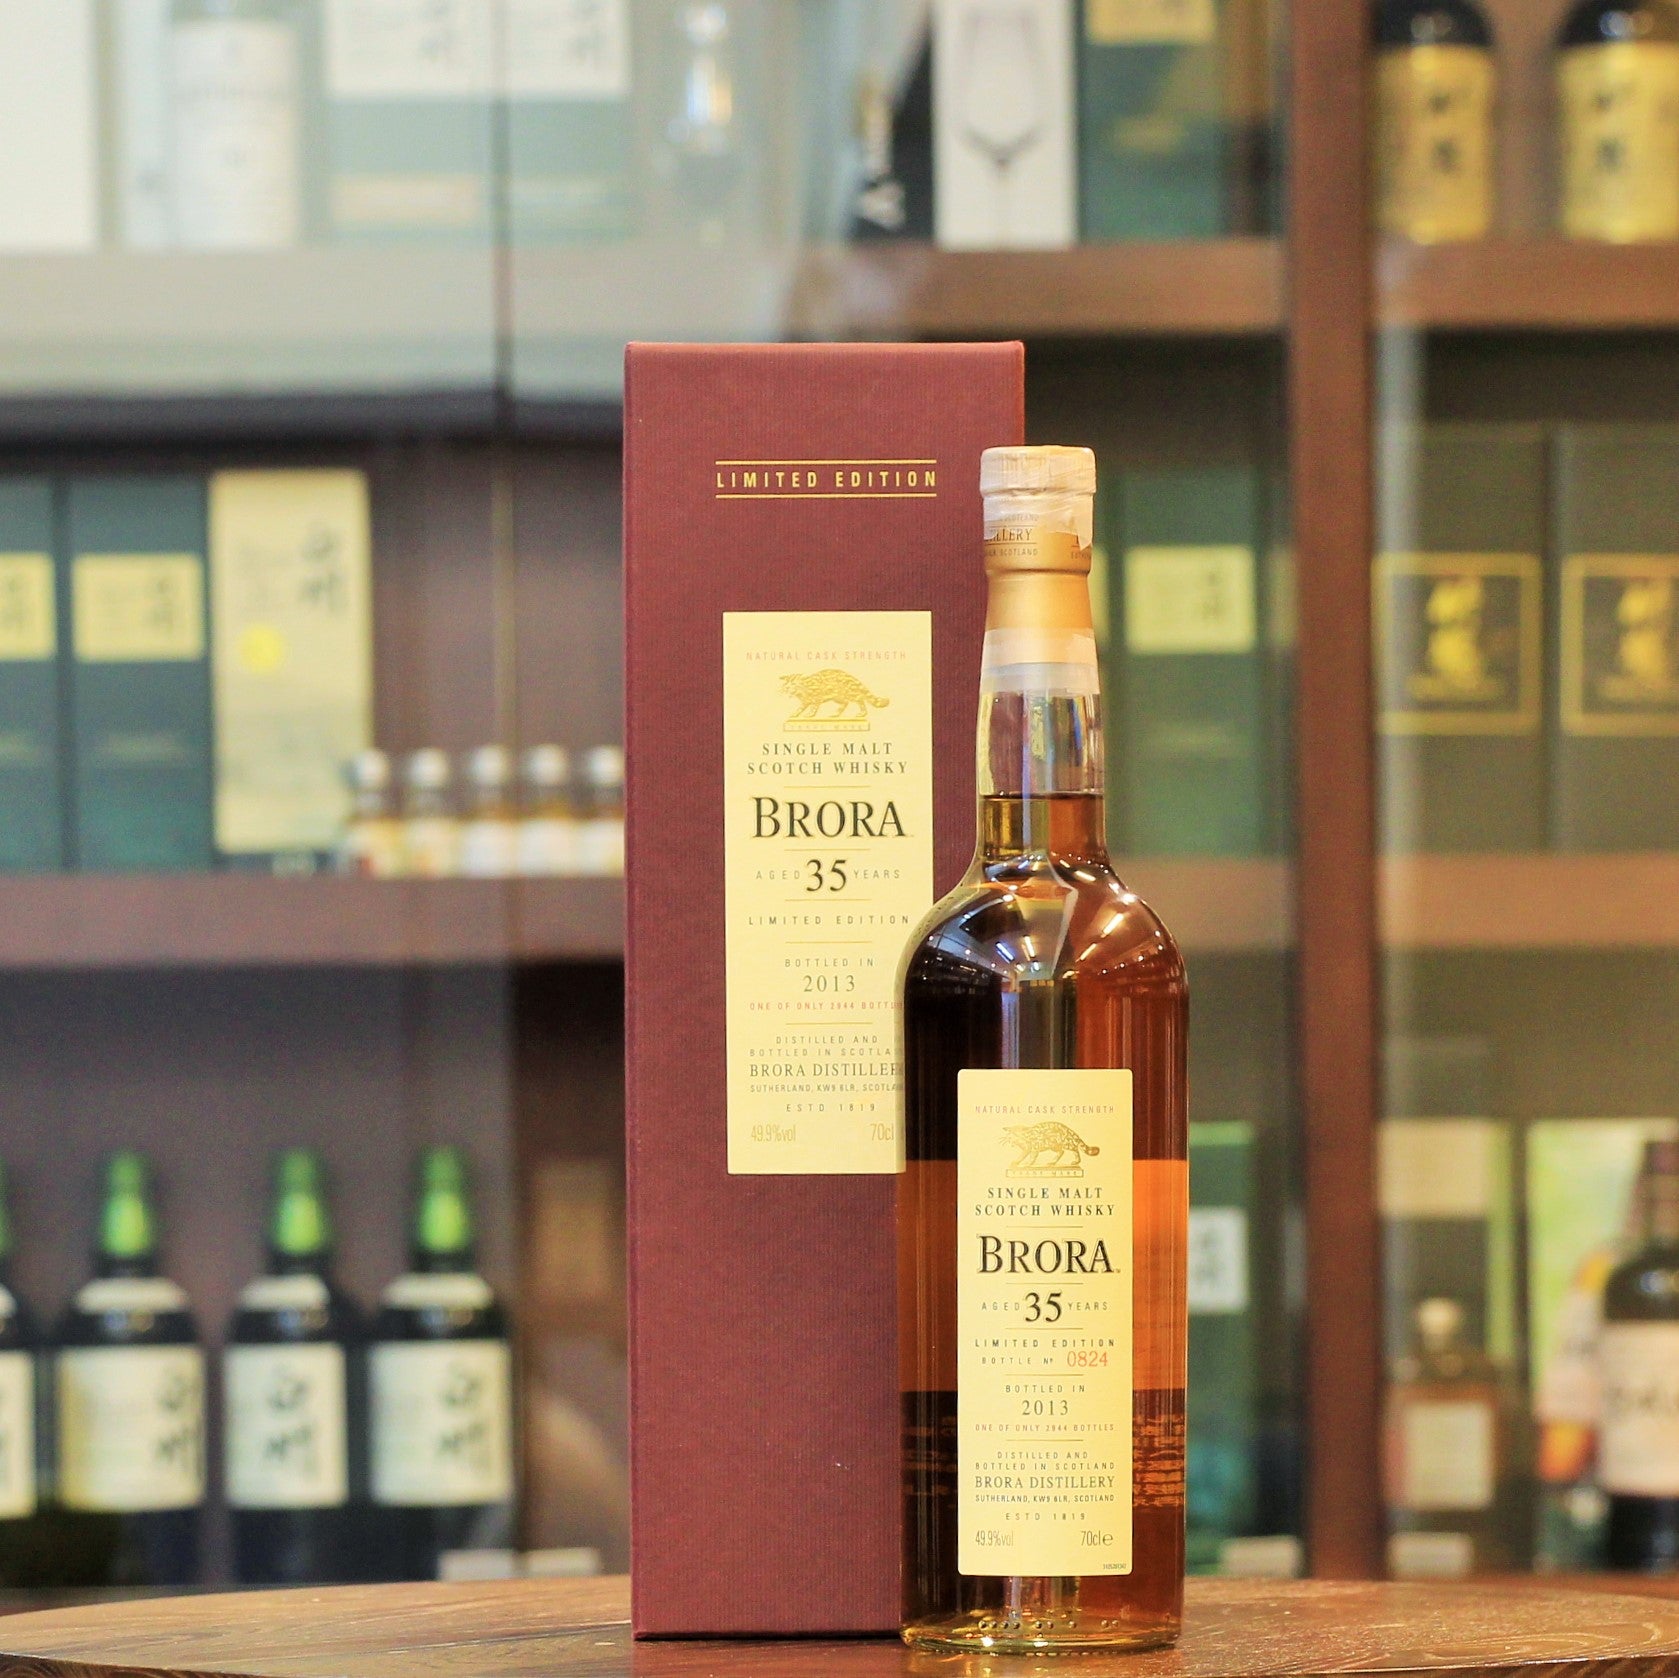 Brora 1977 Single Malt Scotch Whisky 12th Release 2013, 35 Years Old